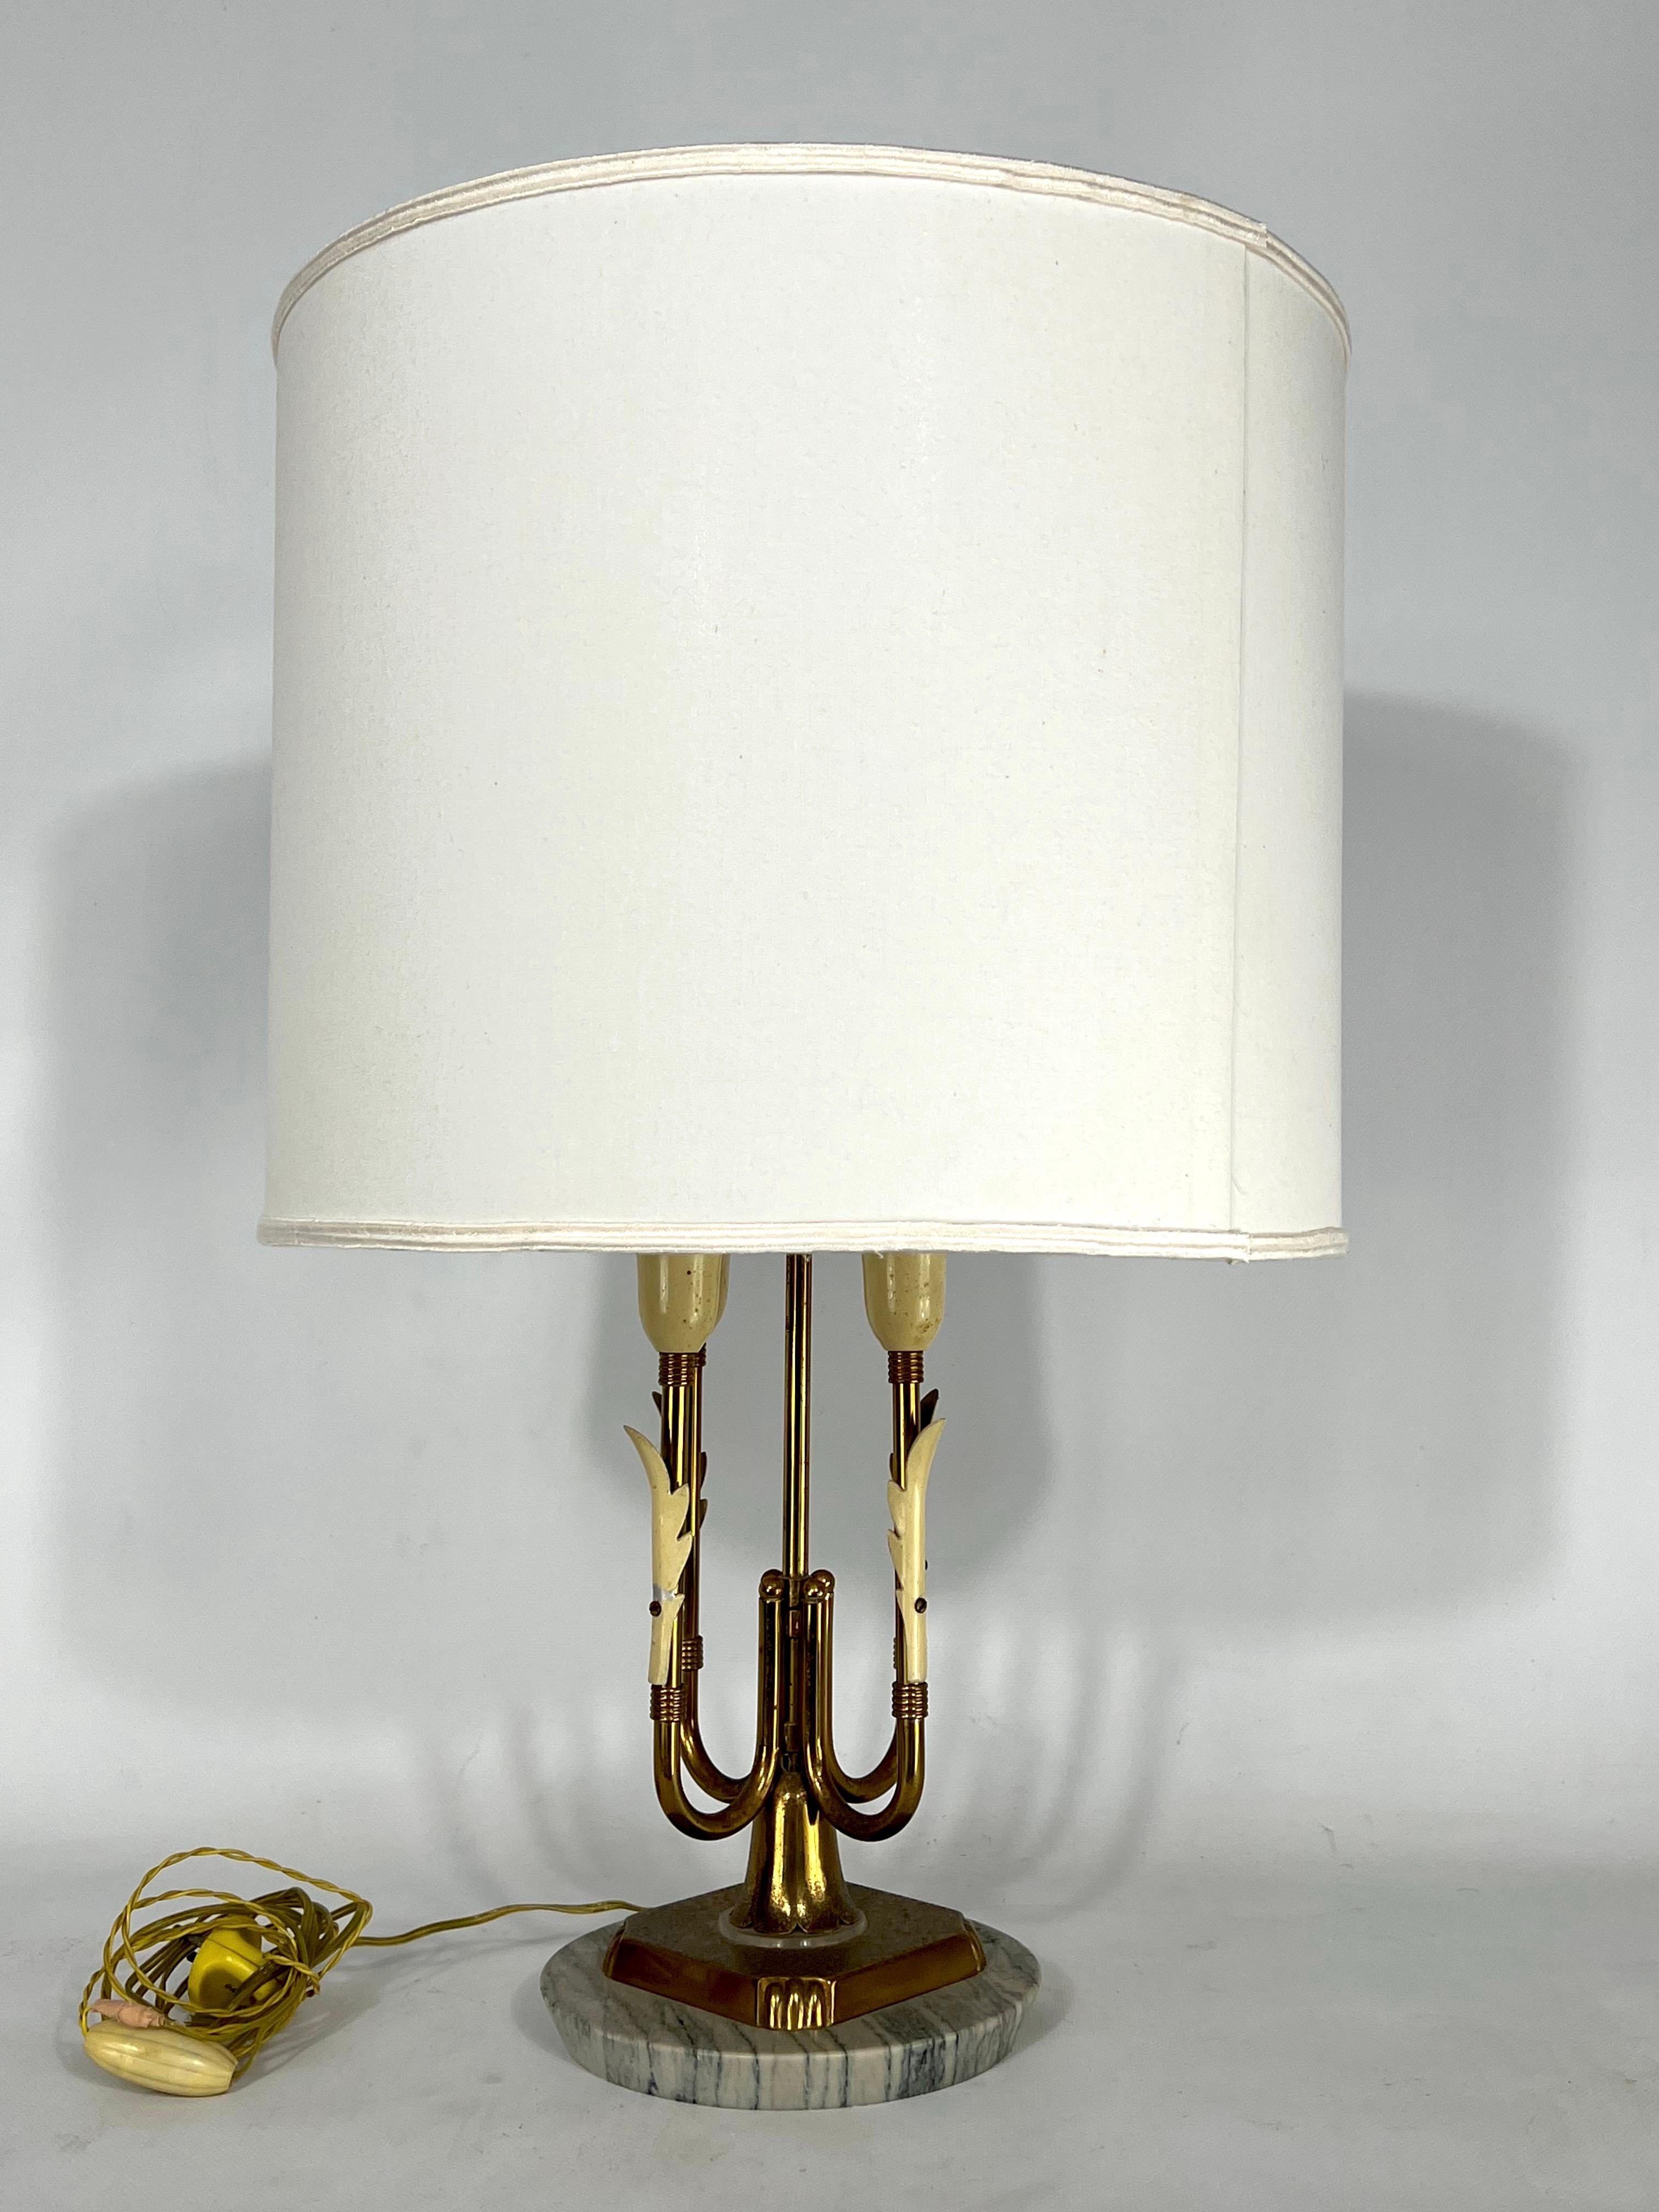 Good vintage condition with trace of age and use and spots on the brass for this brass and marble table lamp produced in Italy during the 50s. It mounts four sockets for E14 lamps. Full working with EU standard, adaptable on demand for USA standard.